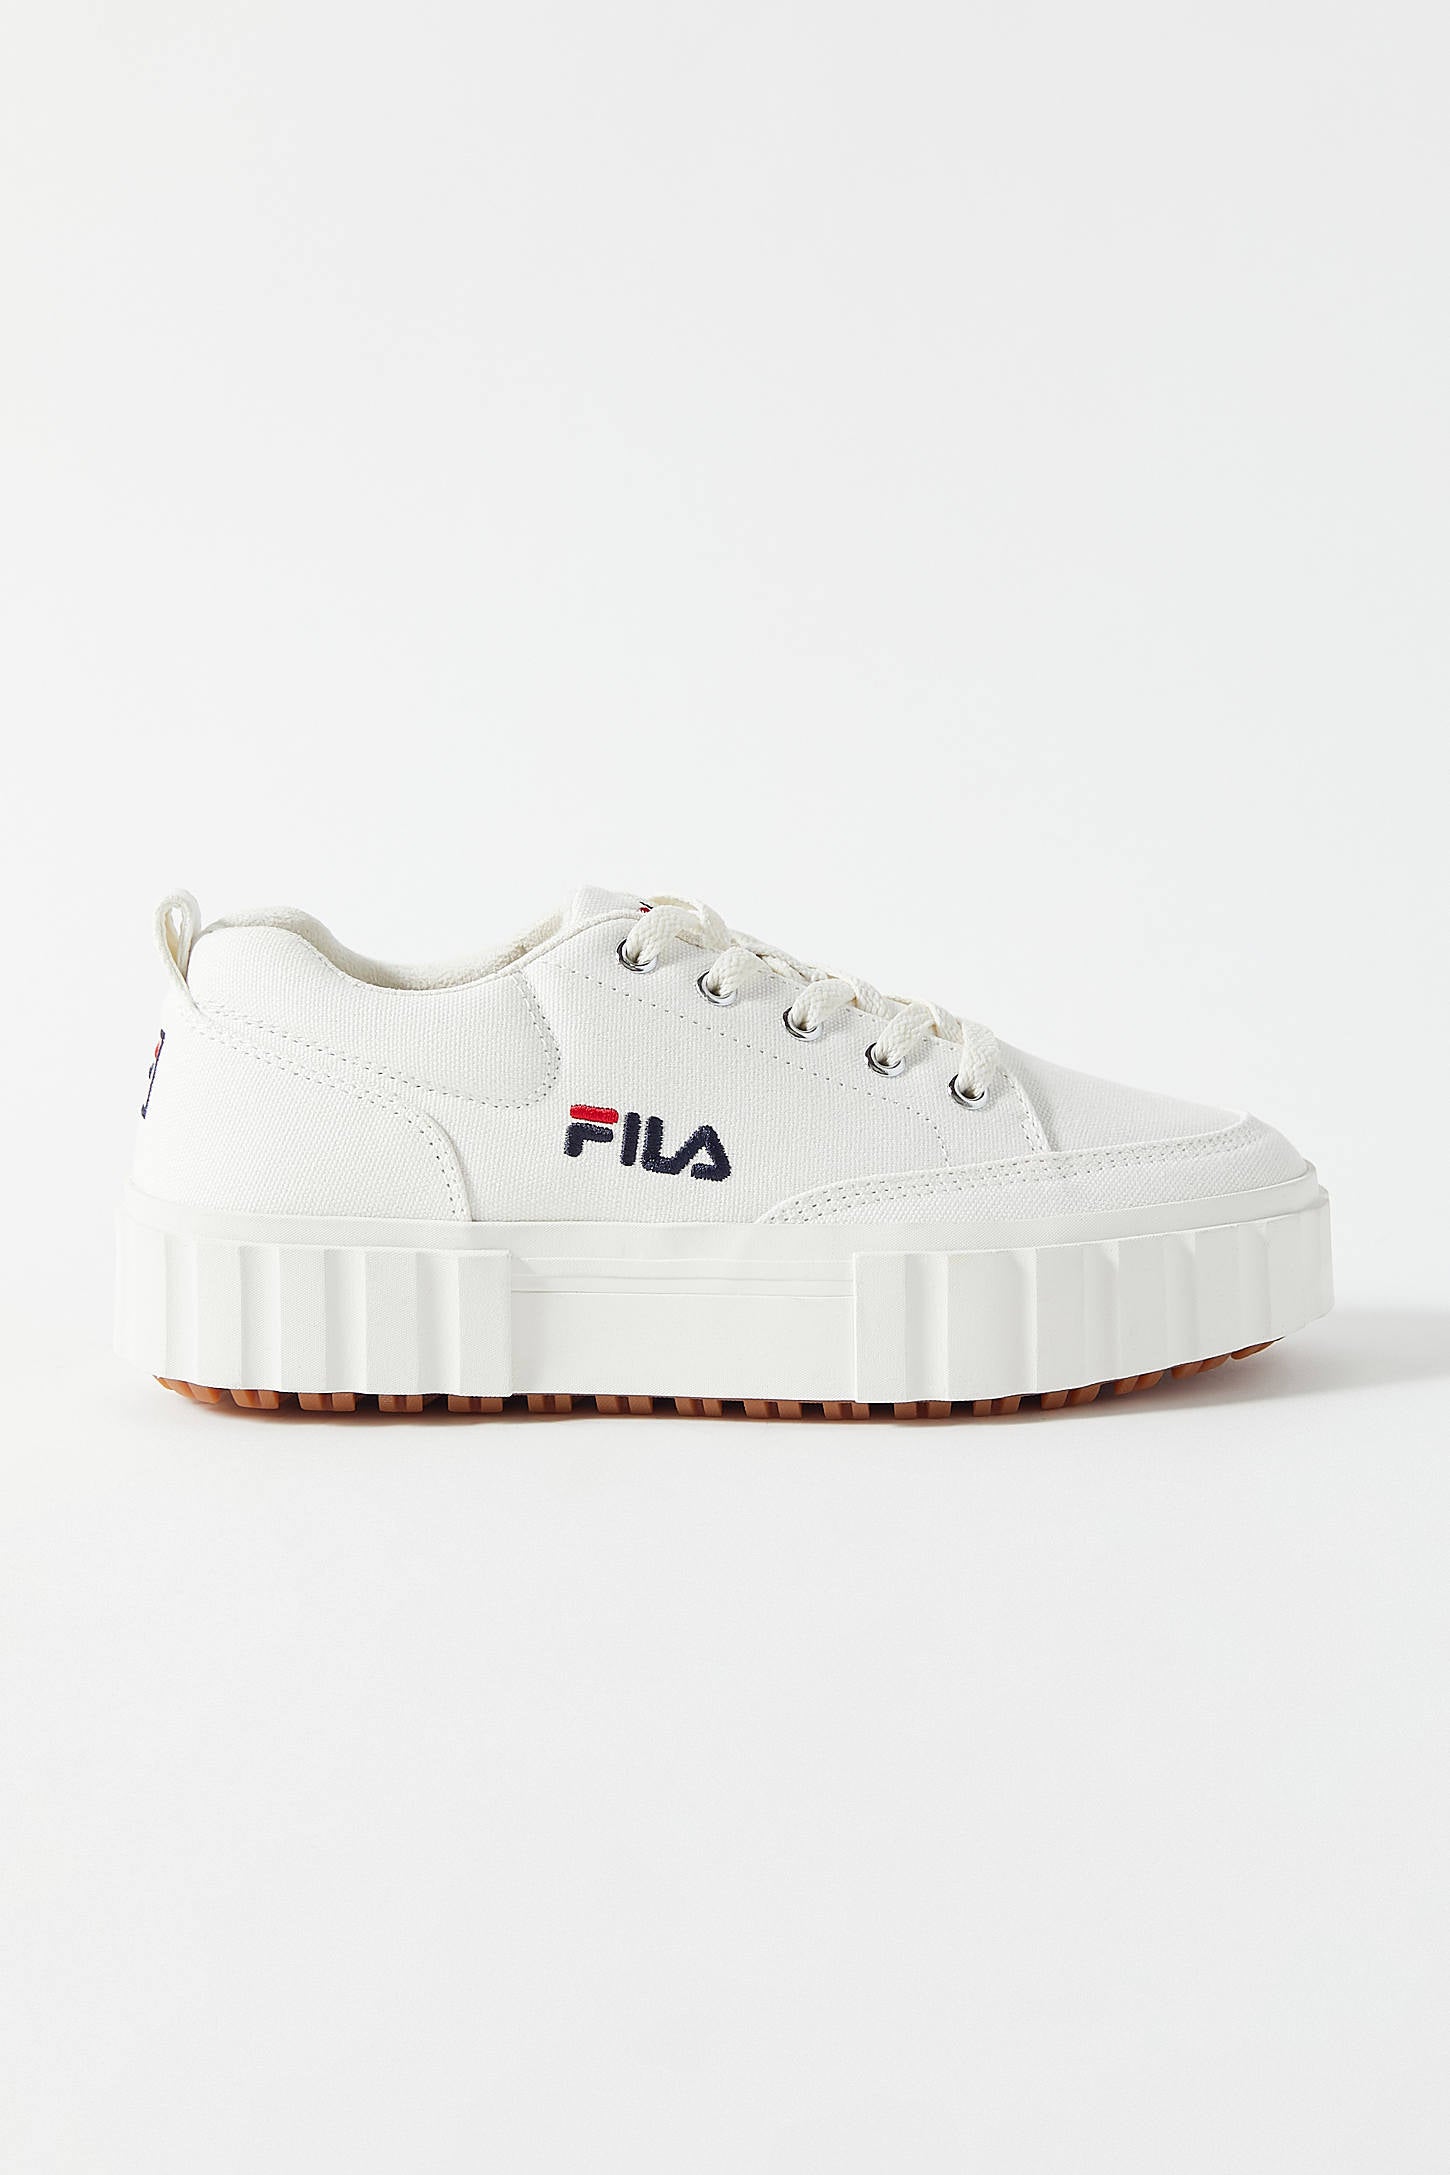 fila pink lilac and yellow disruptor 3 zip trainers